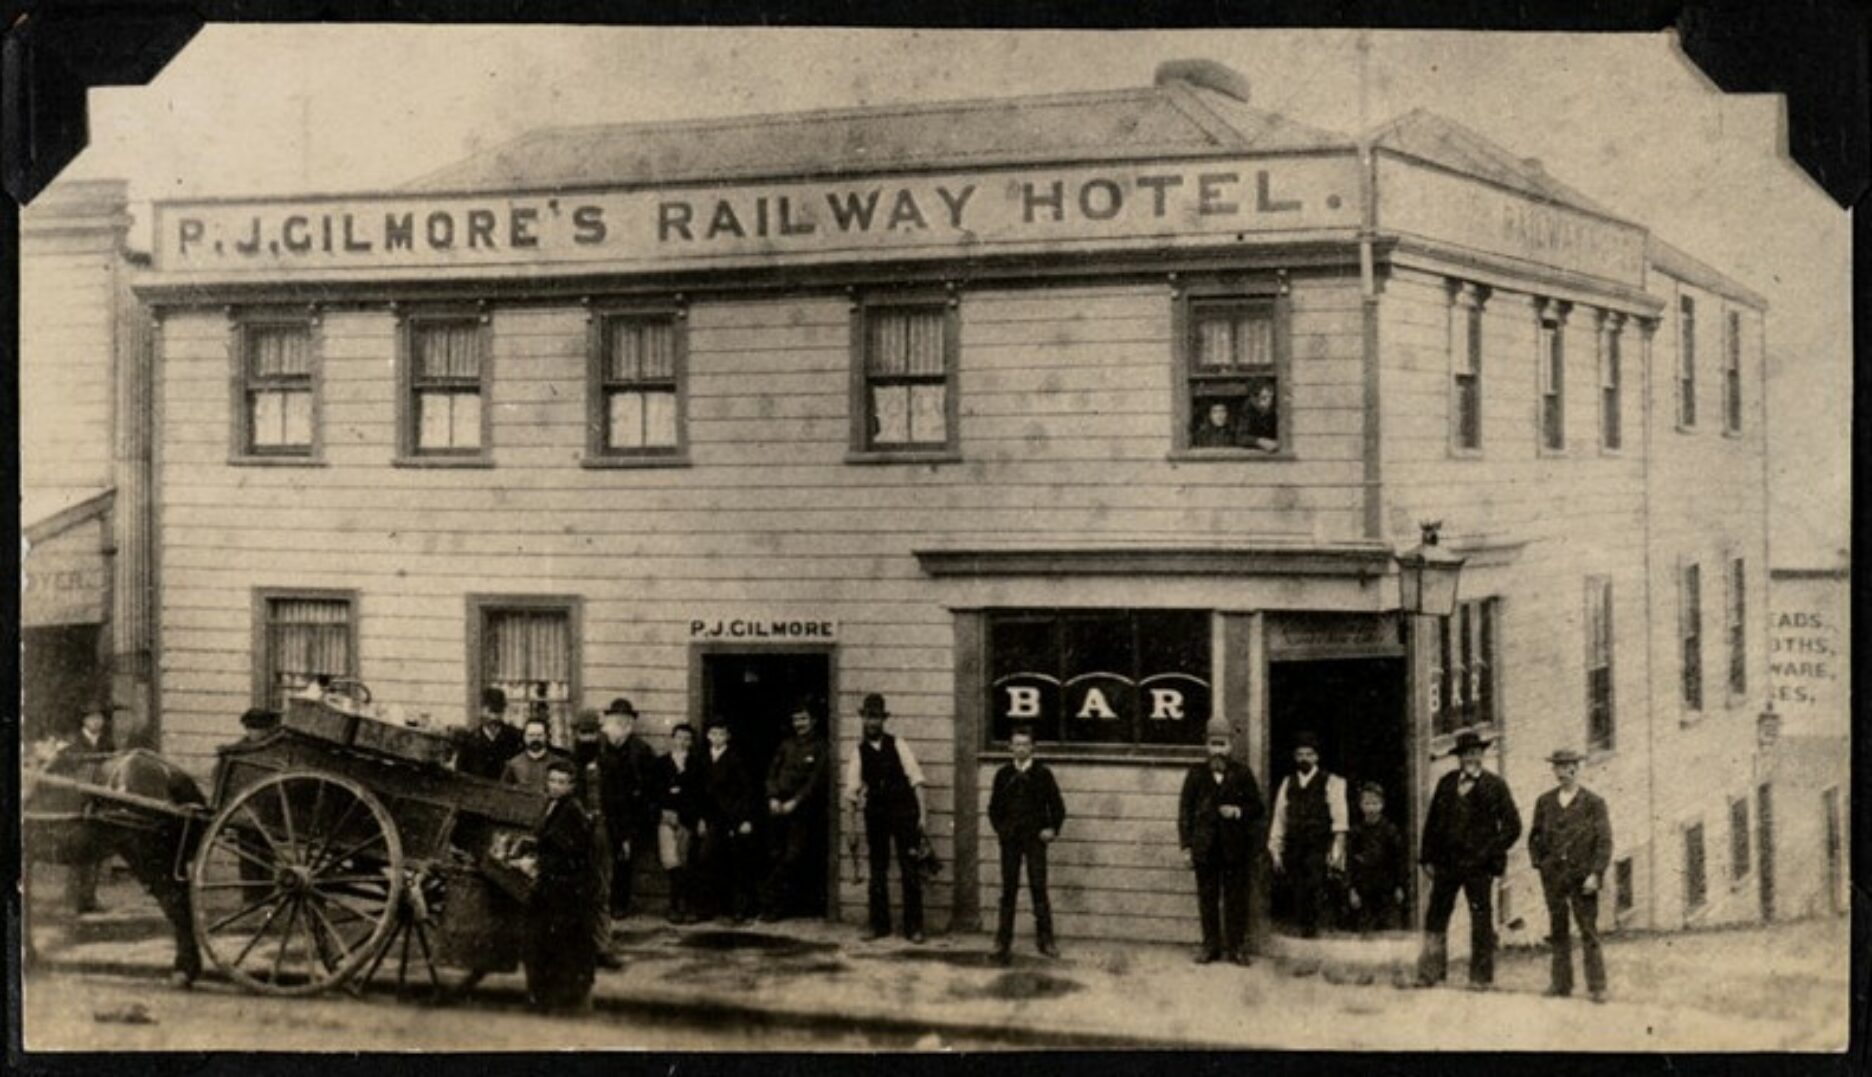 The old Railway Hotel